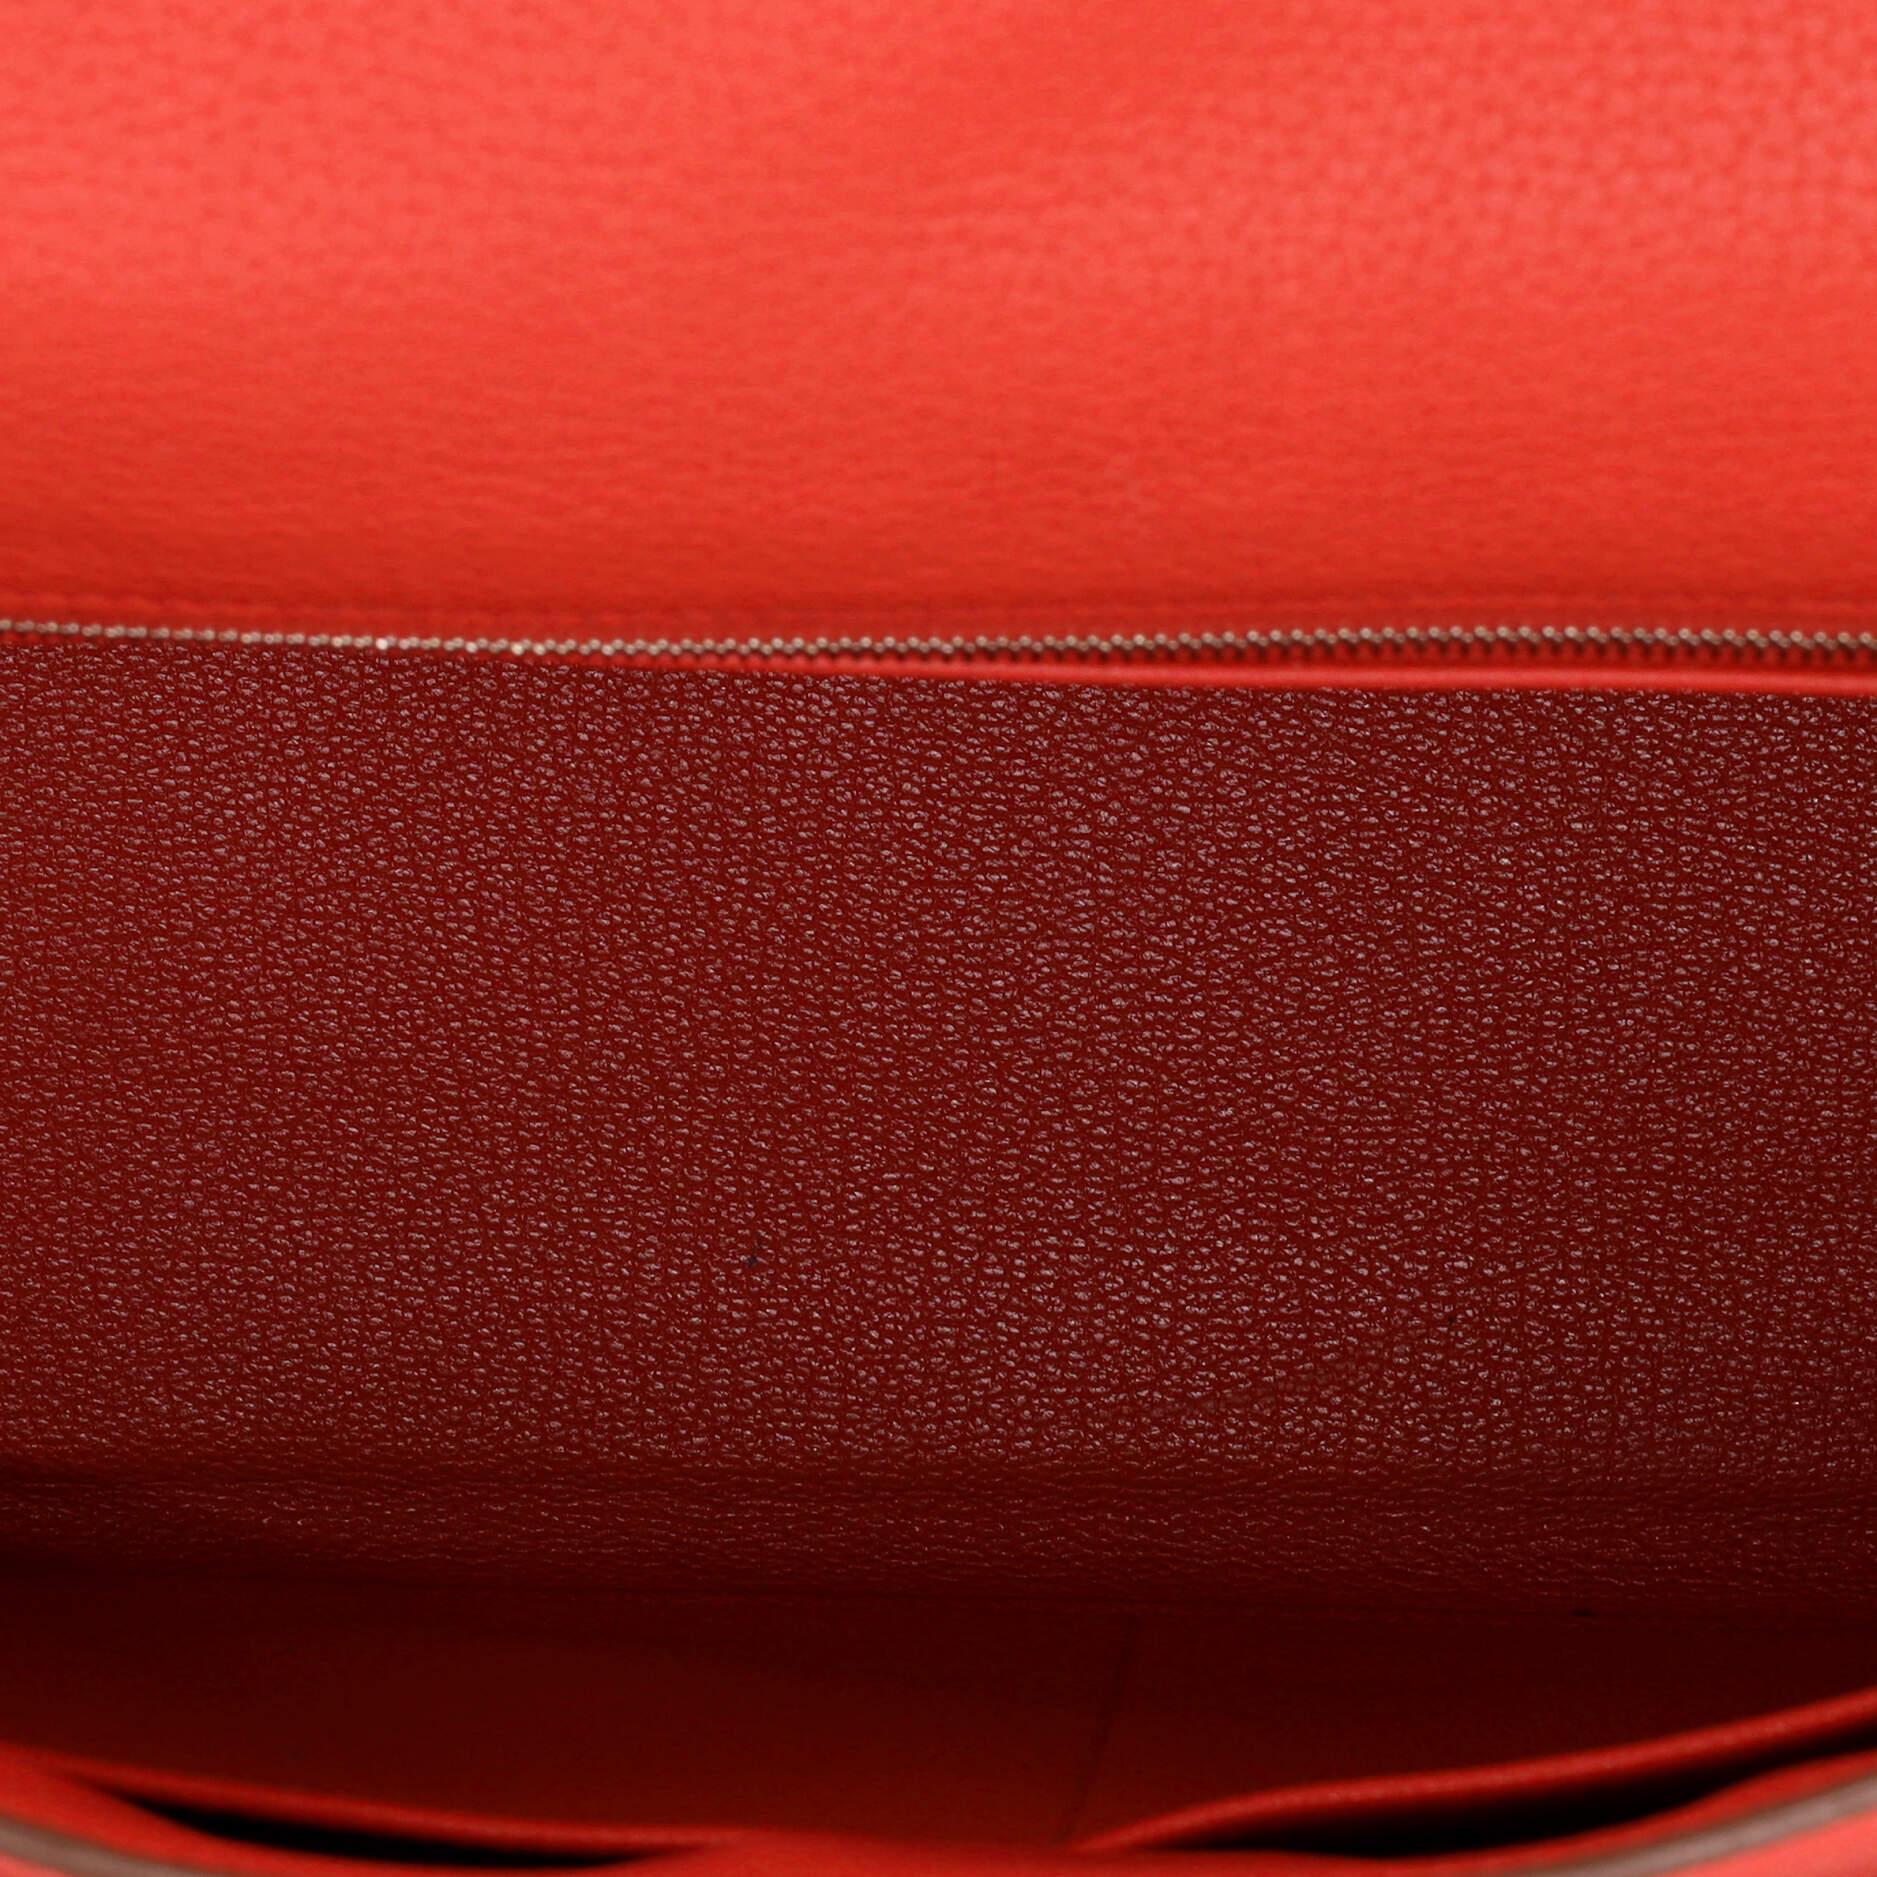 Hermes Kelly Handbag Red Clemence with Palladium Hardware 35 For Sale 1